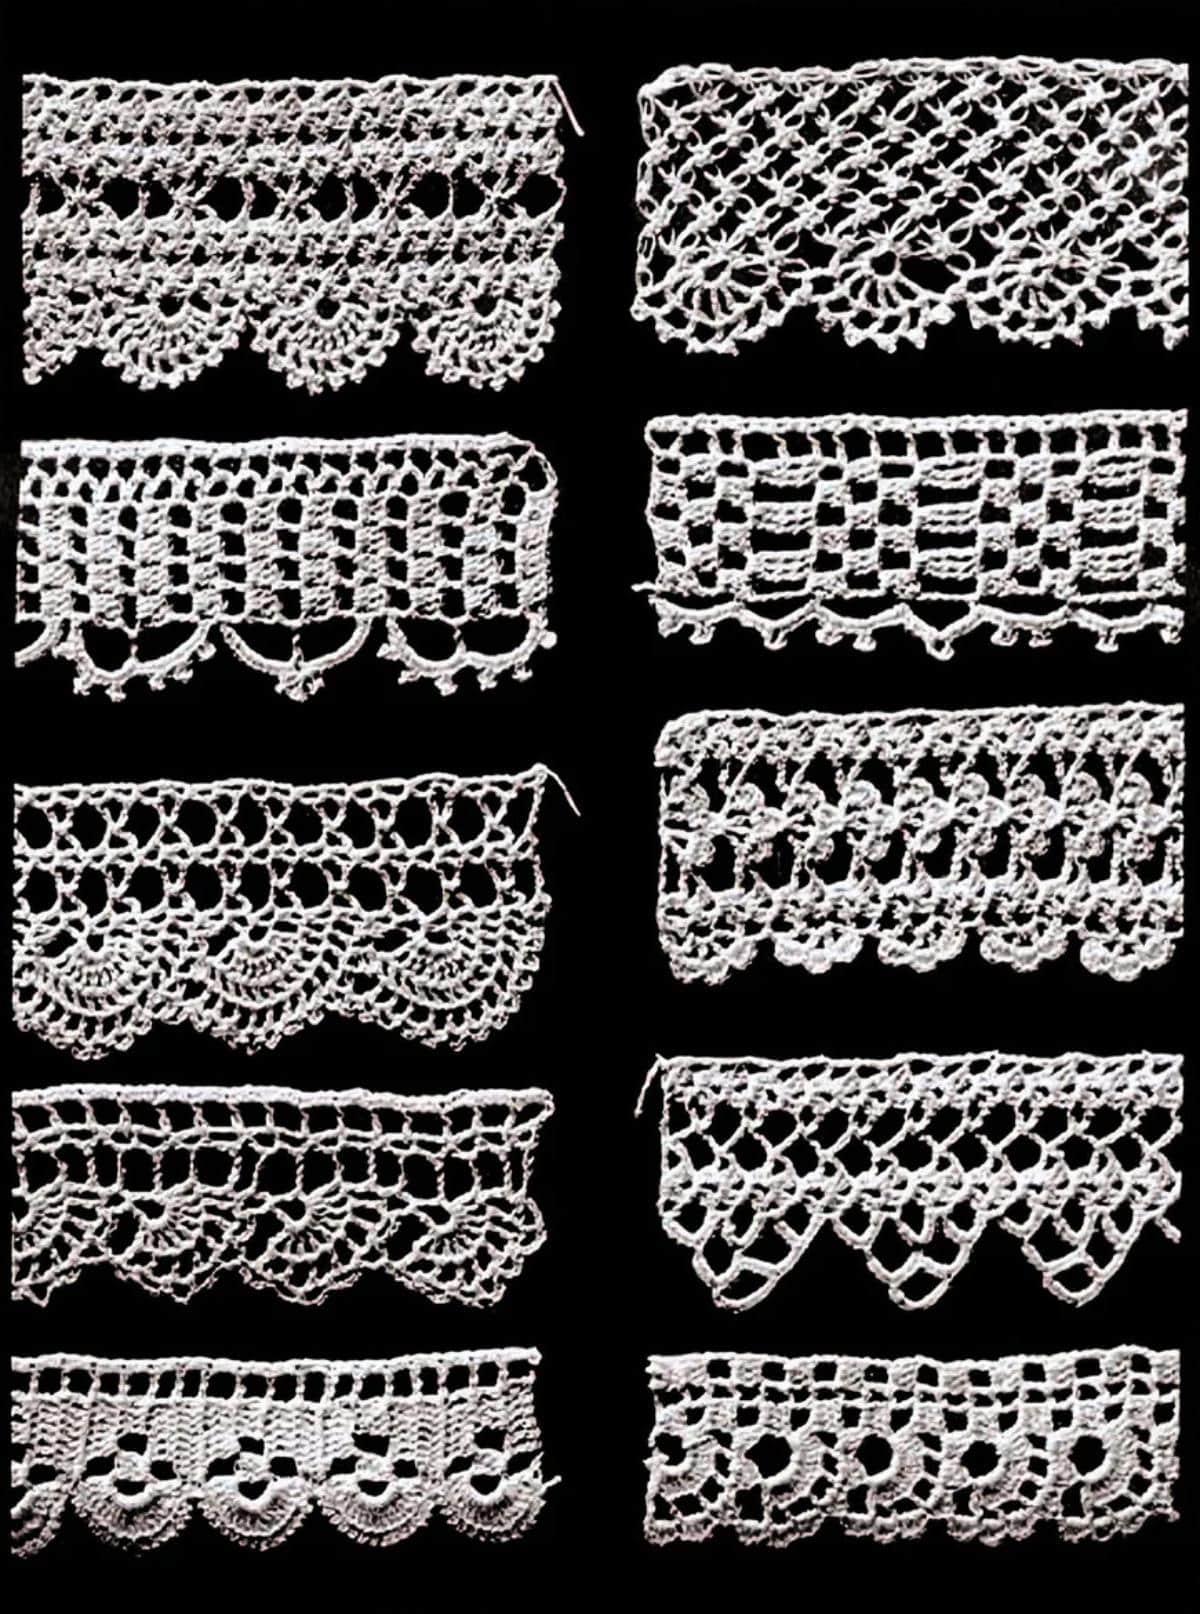 Classic Crochet Lace Edging Techniques for Contemporary Style